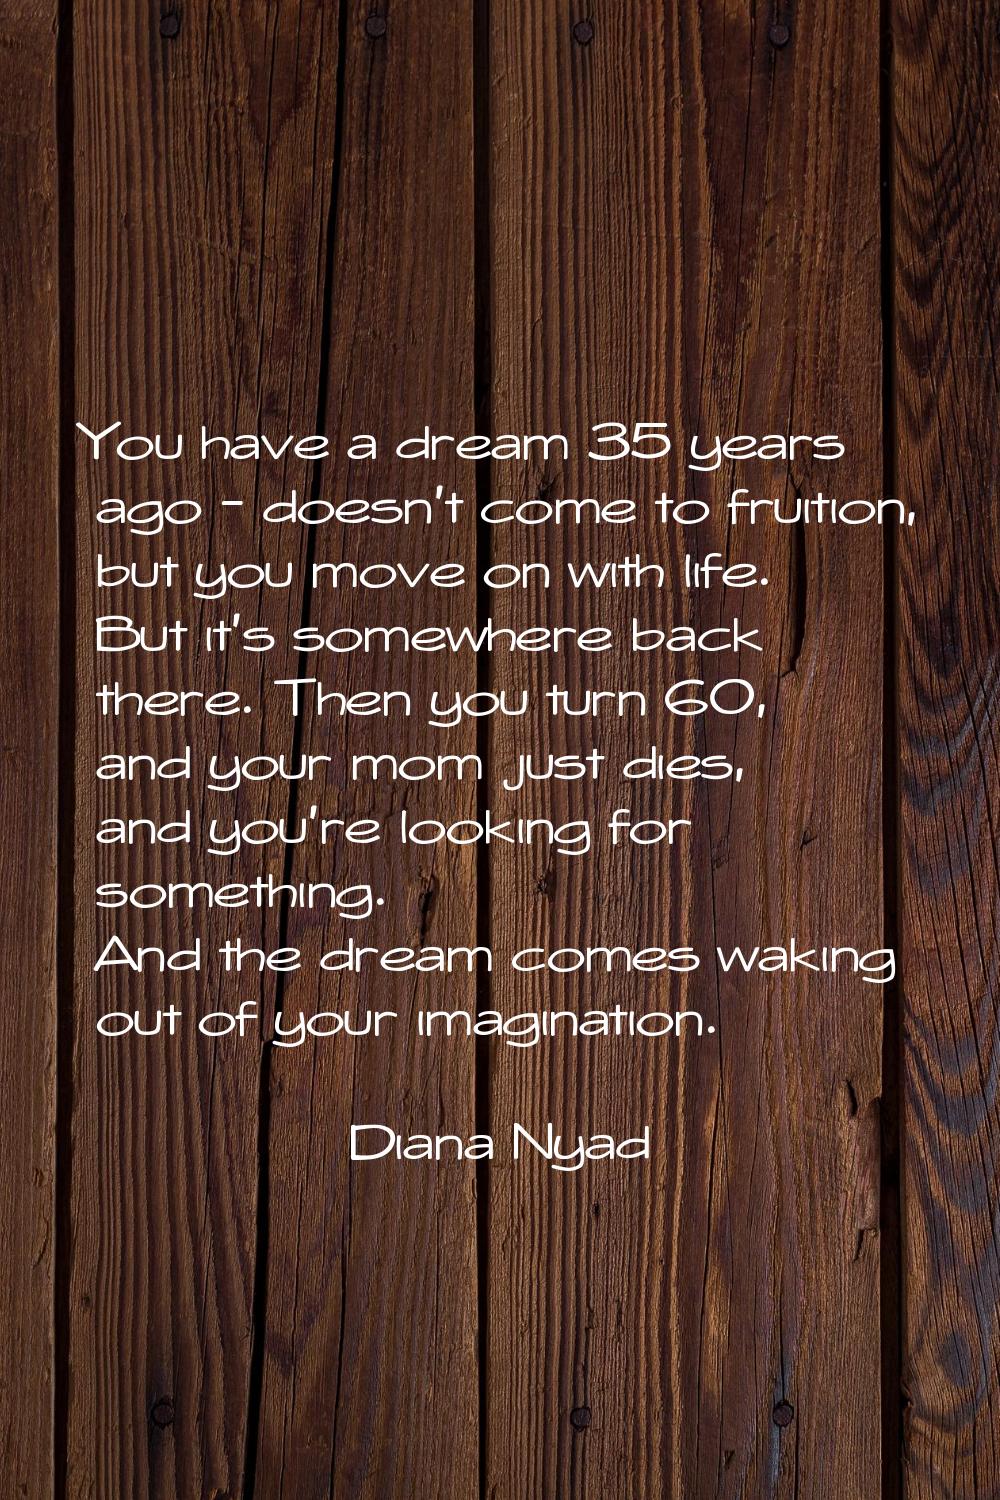 You have a dream 35 years ago - doesn't come to fruition, but you move on with life. But it's somew